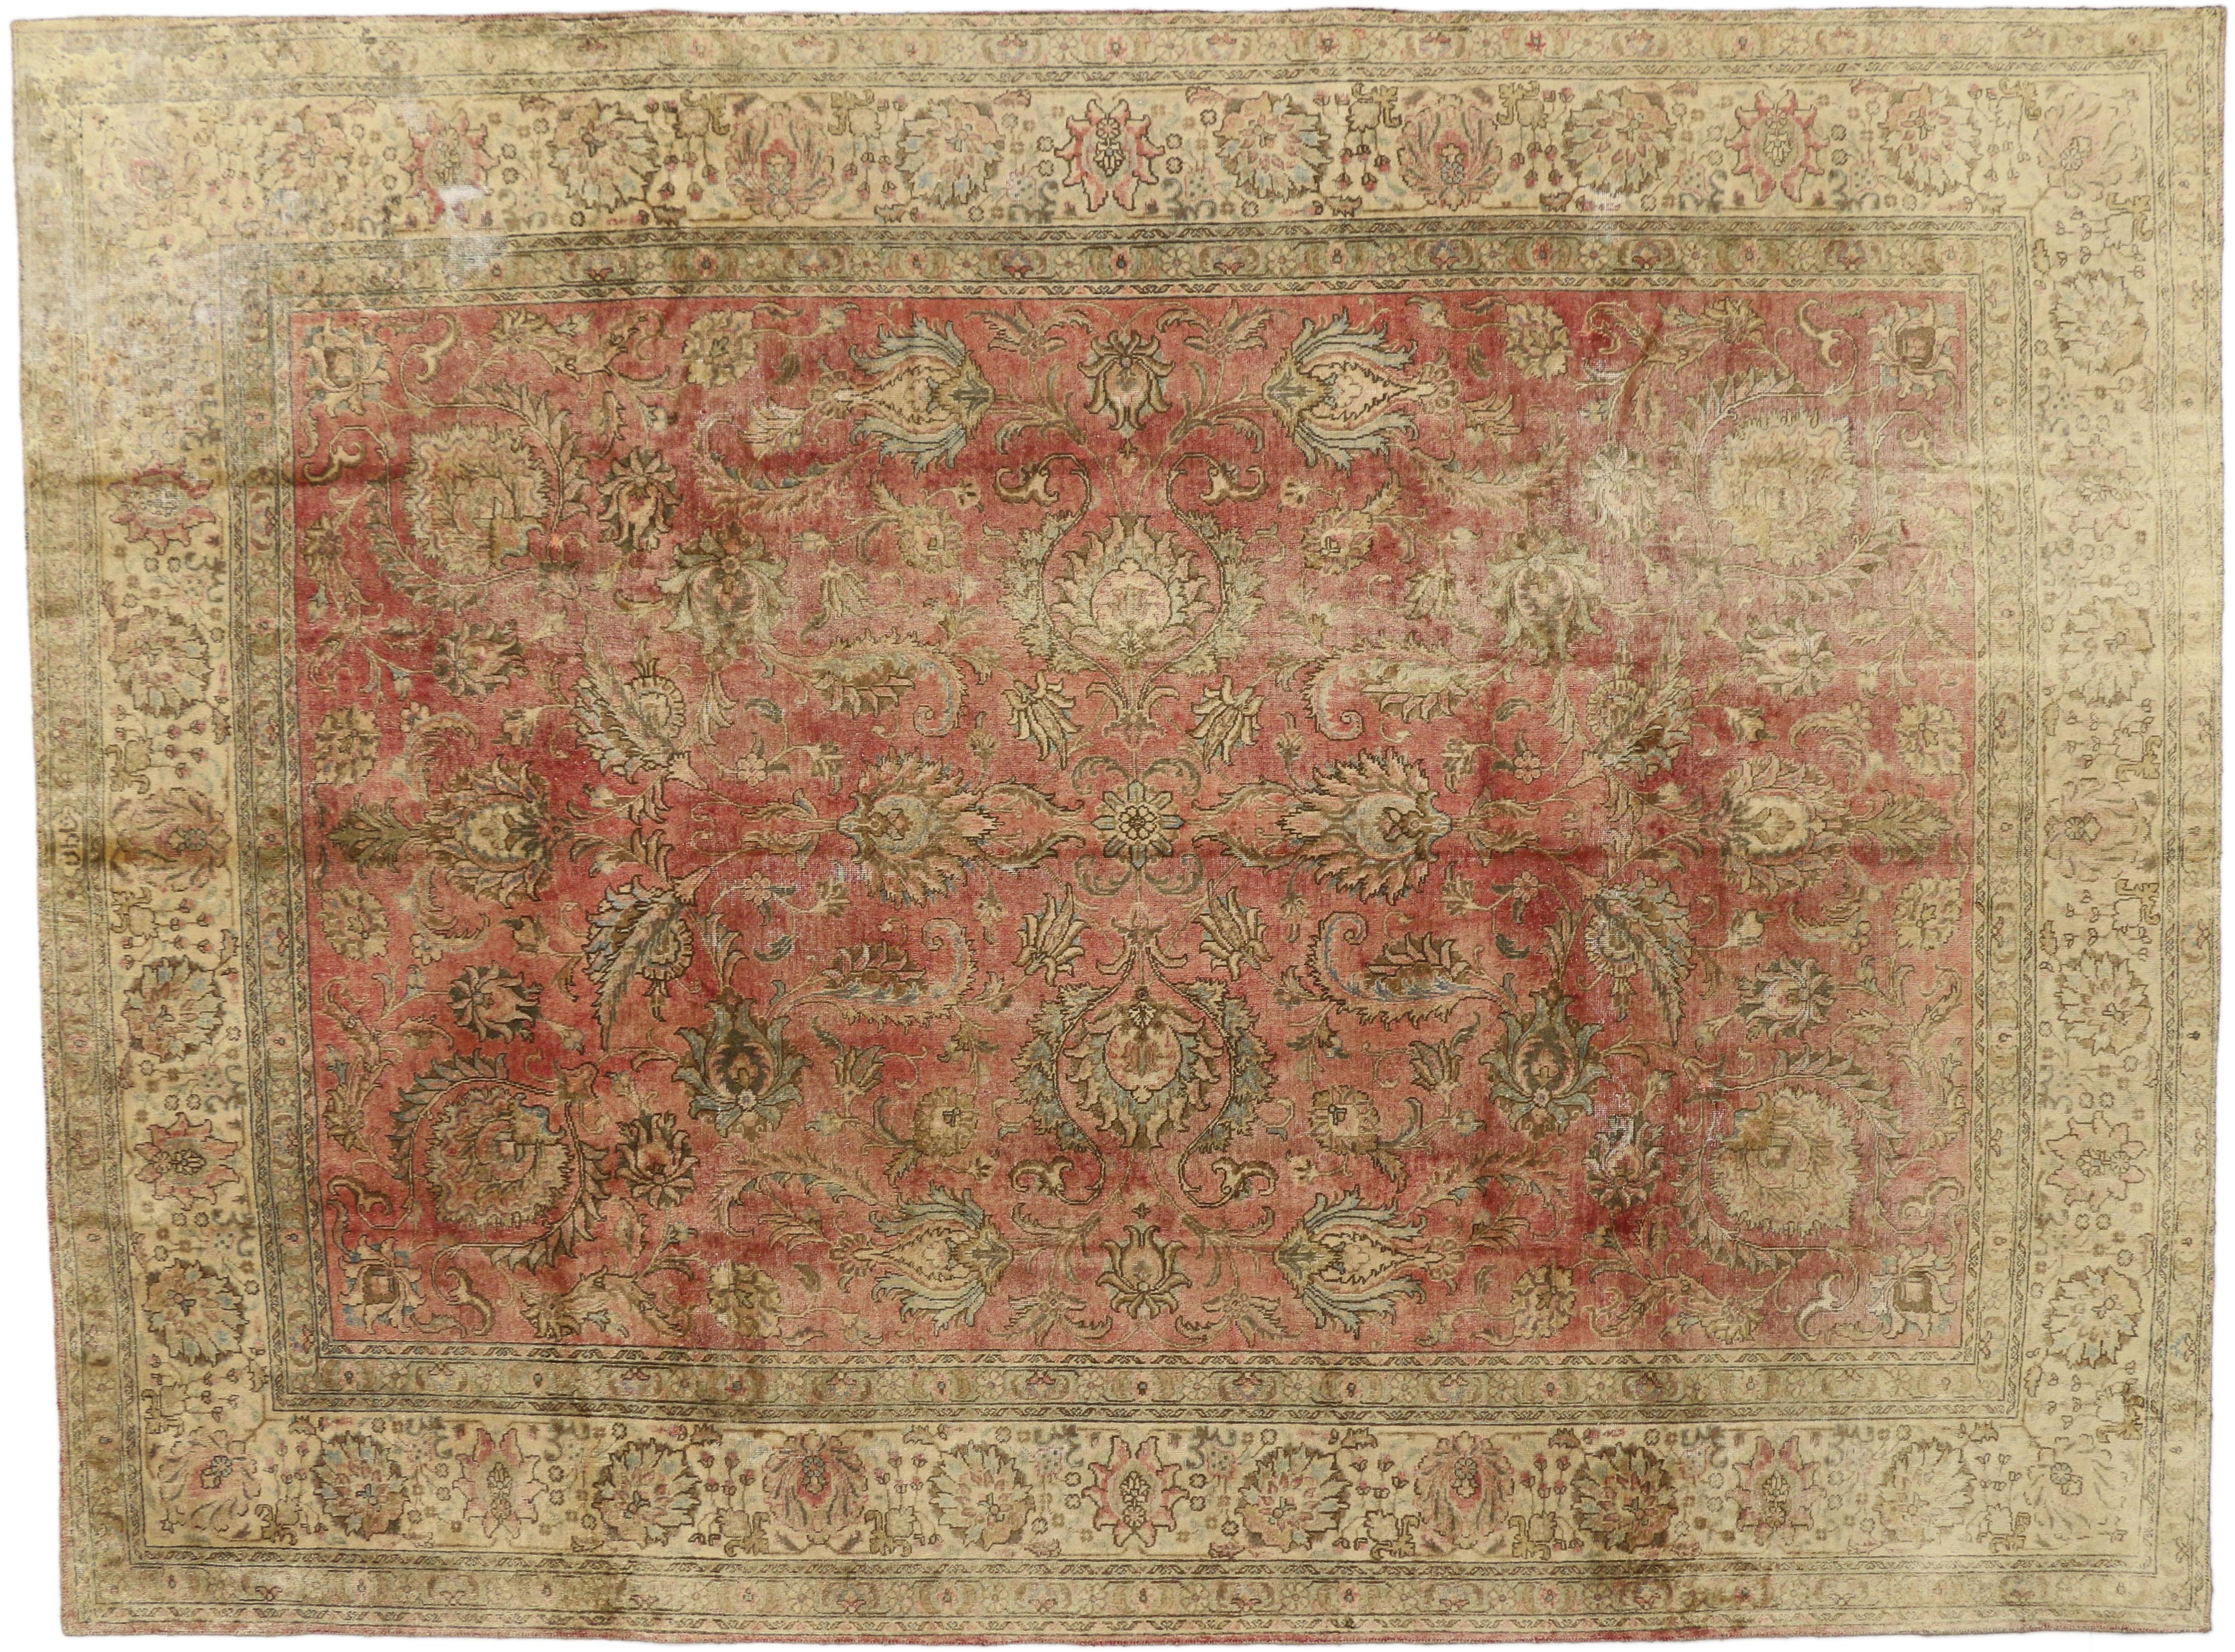 Distressed Antique Persian Tabriz Rug Industrial Rustic Style In Distressed Condition For Sale In Dallas, TX